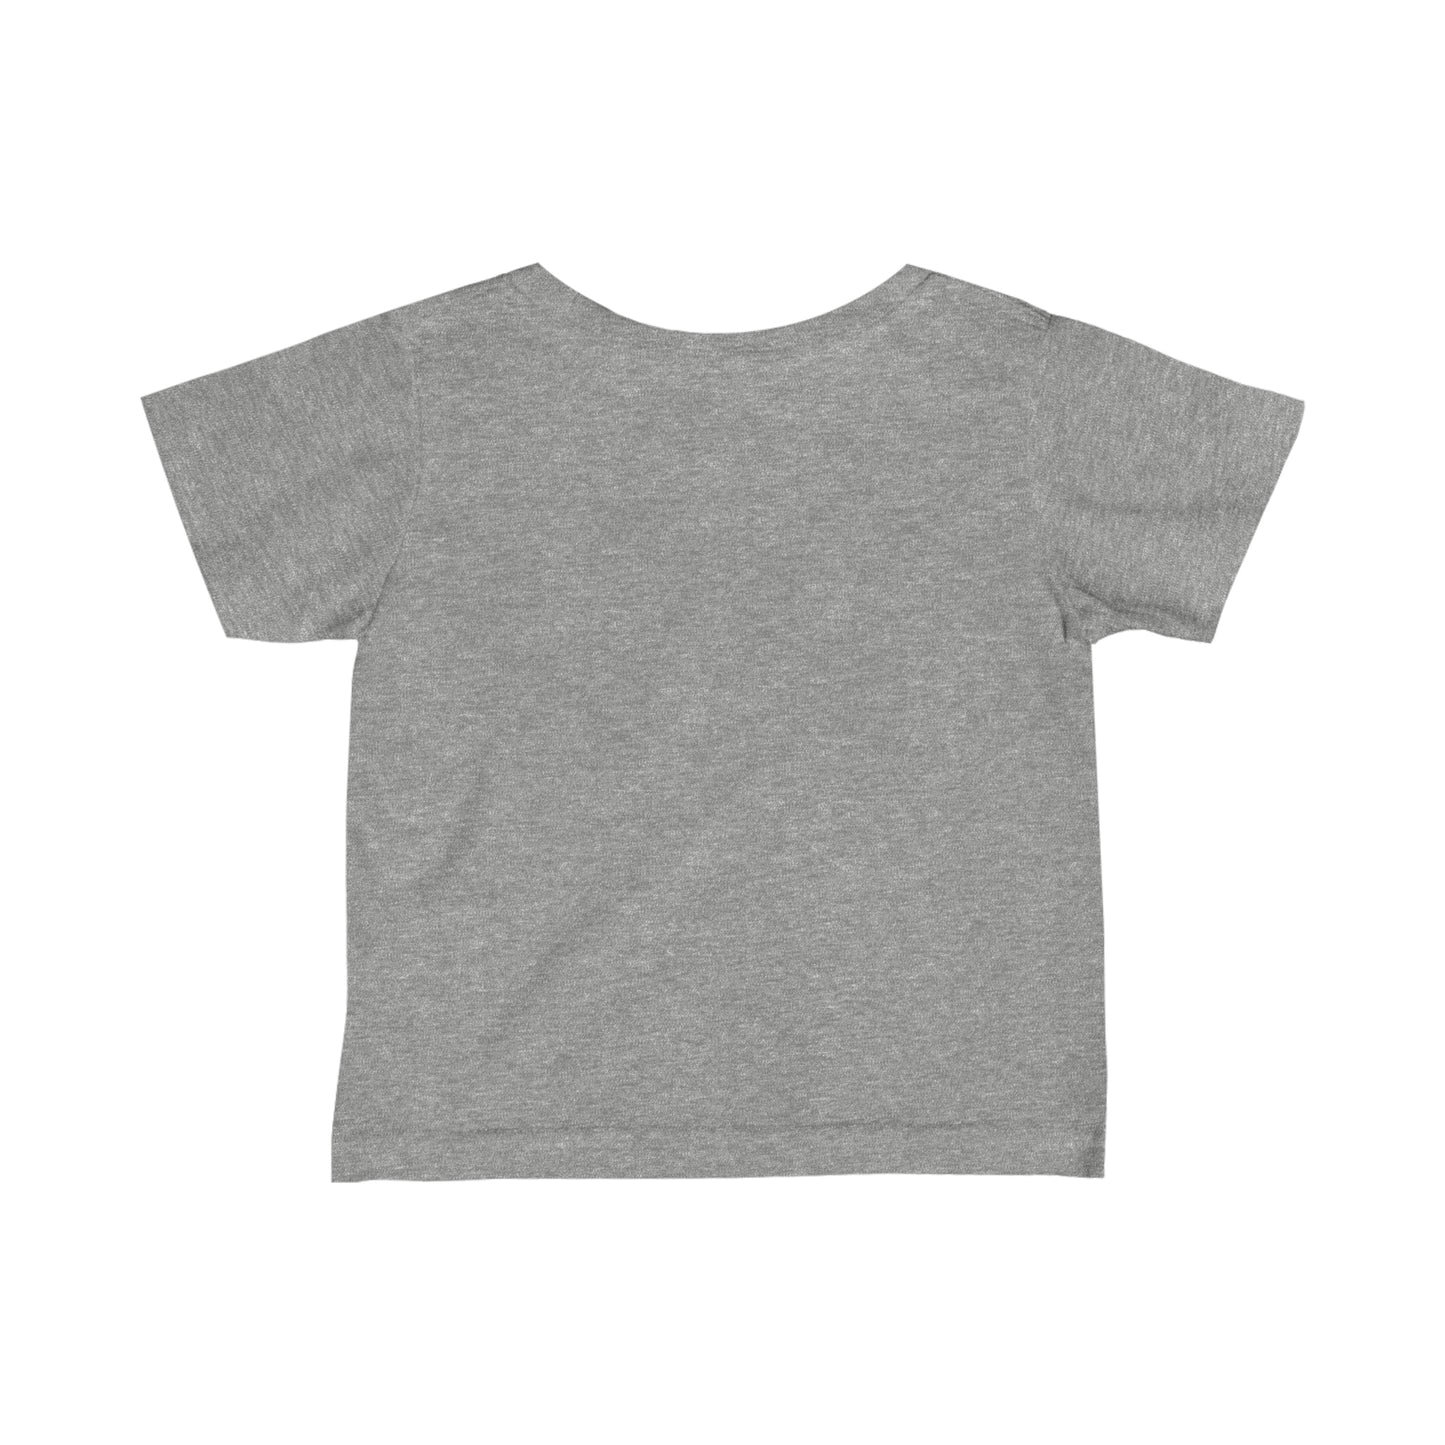 Infant Tee | CRFC Wolfhounds Blue Crest